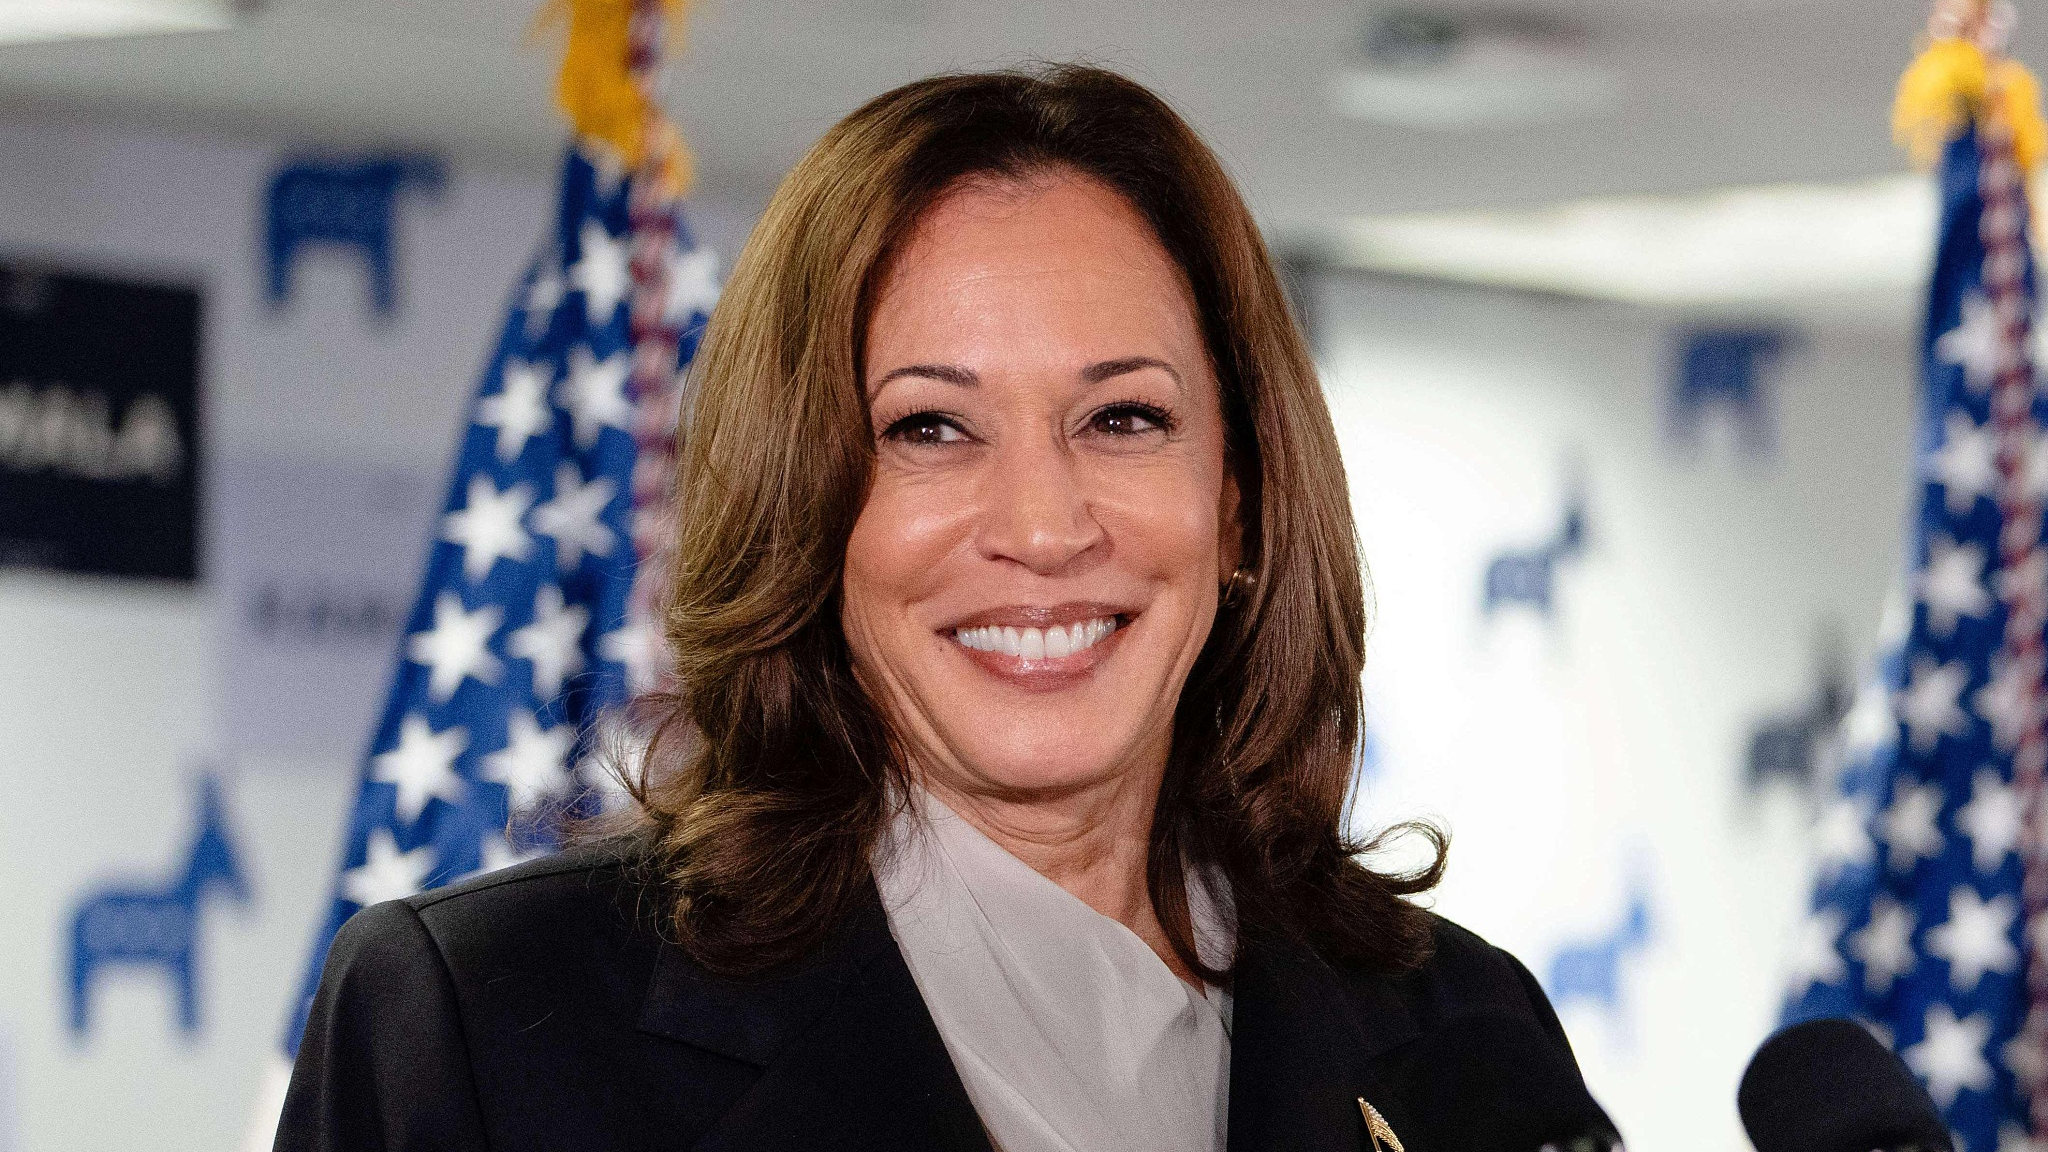 U.S. Vice President Kamala Harris has secured the support of a majority of the Democratic delegates needed to become her party's nominee against Donald Trump. /CFP